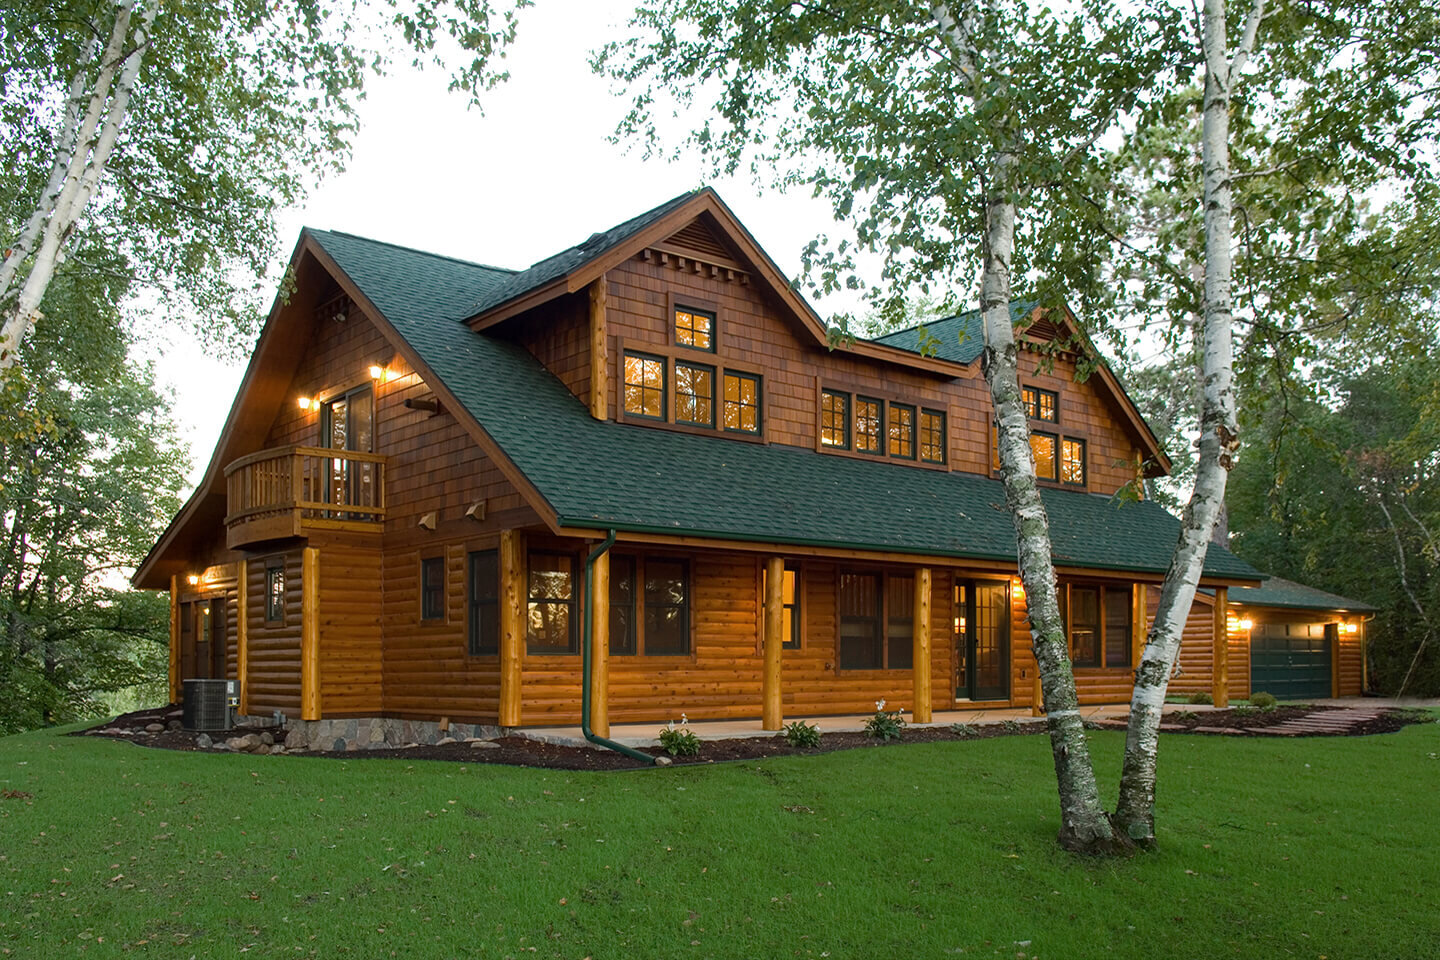 Lit up log home with lawn and aspen trees